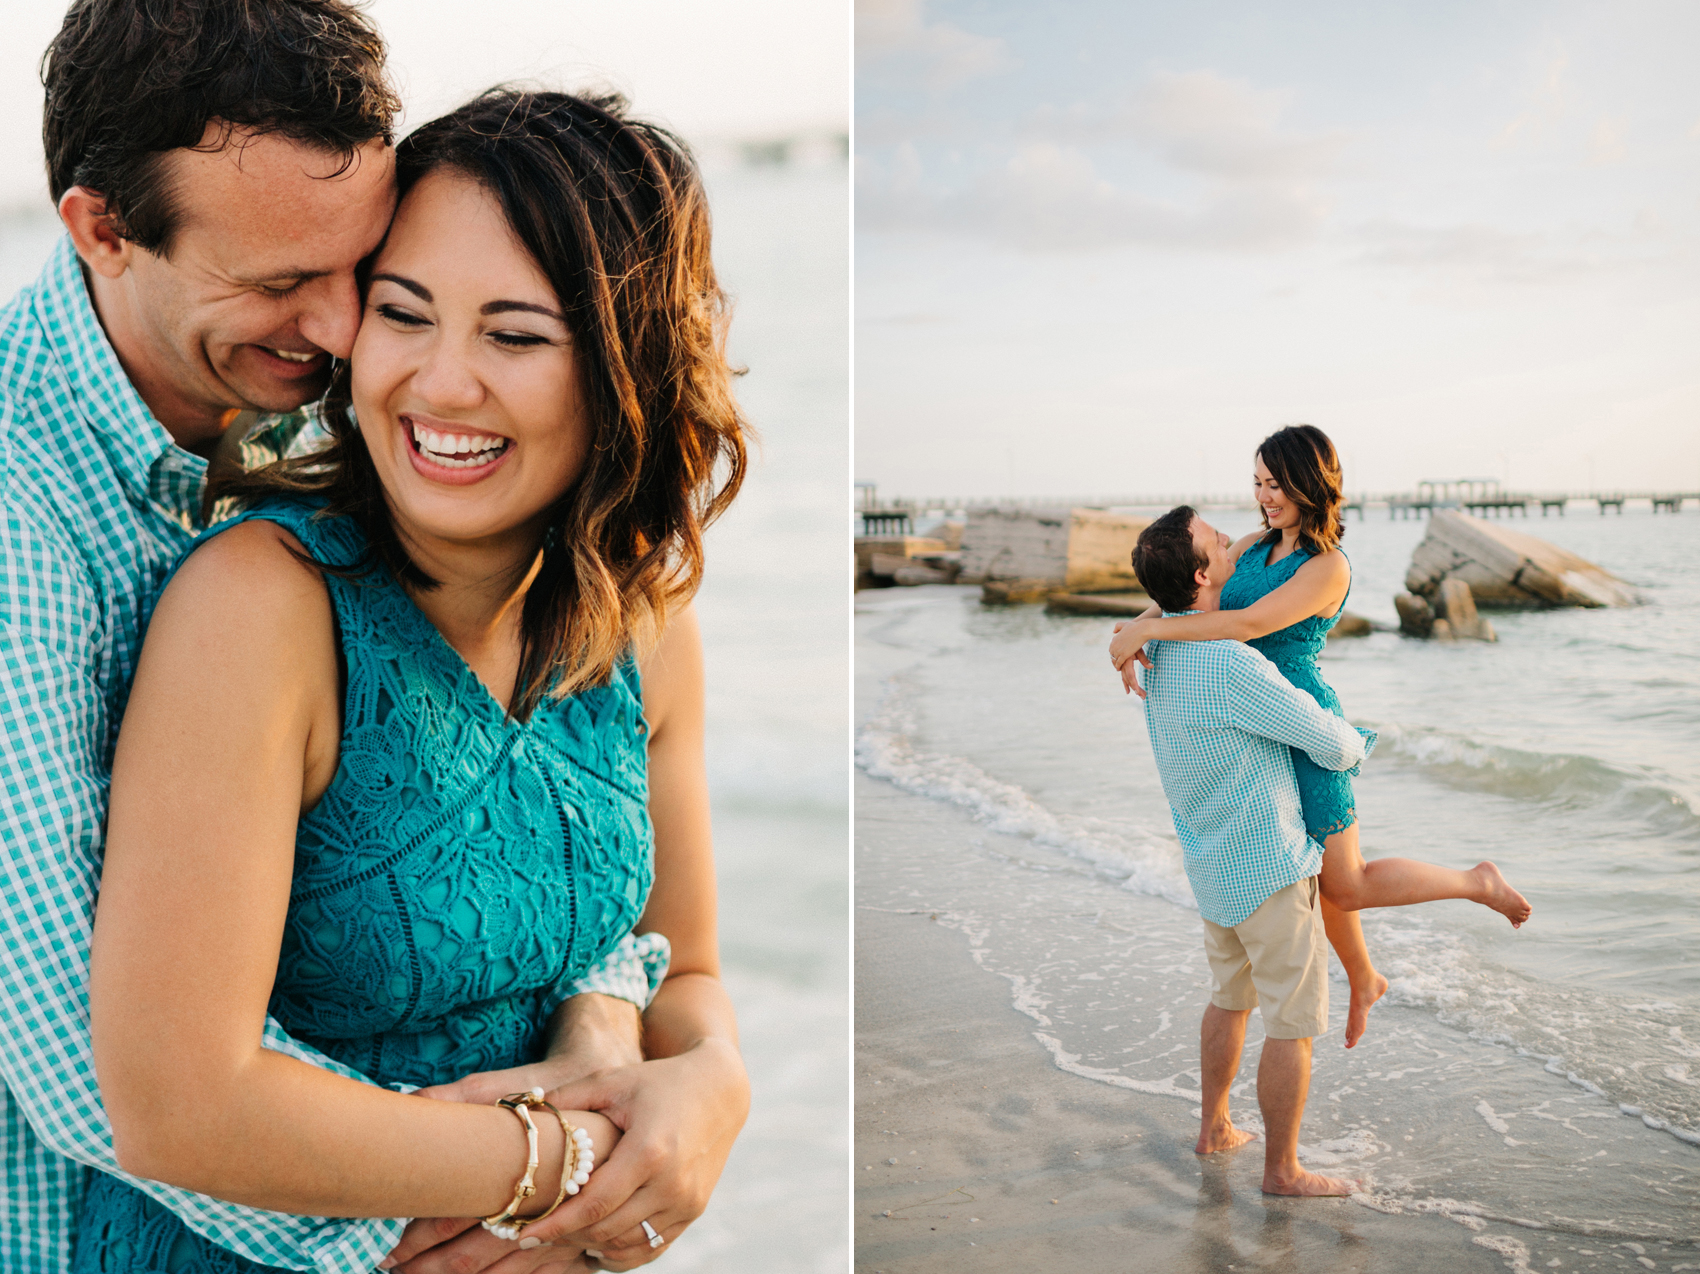 Natural candid engagement photos at sunset on the beach in St. Pete Florida